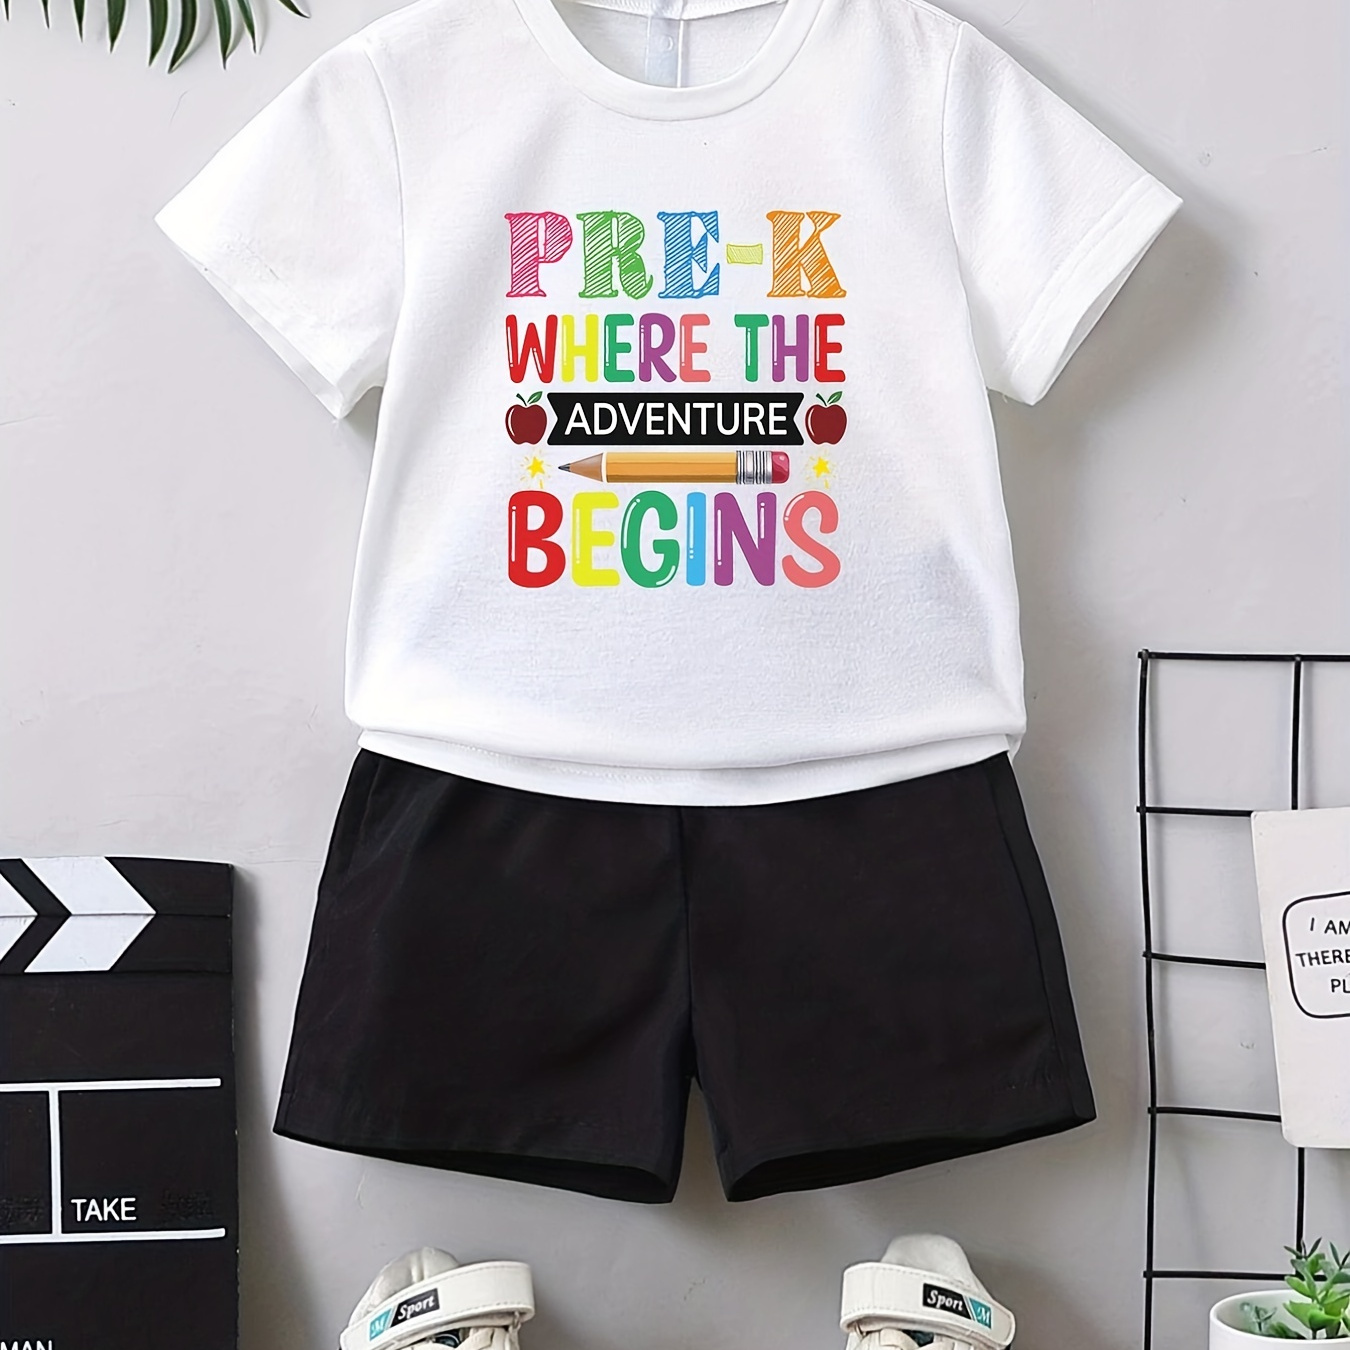 

Pencil Pattern Boy's 2pcs, T-shirt & Shorts Set, Pre-k Where The Adventure Begins Print Casual Outfits, Toddler Kids Clothes For Summer